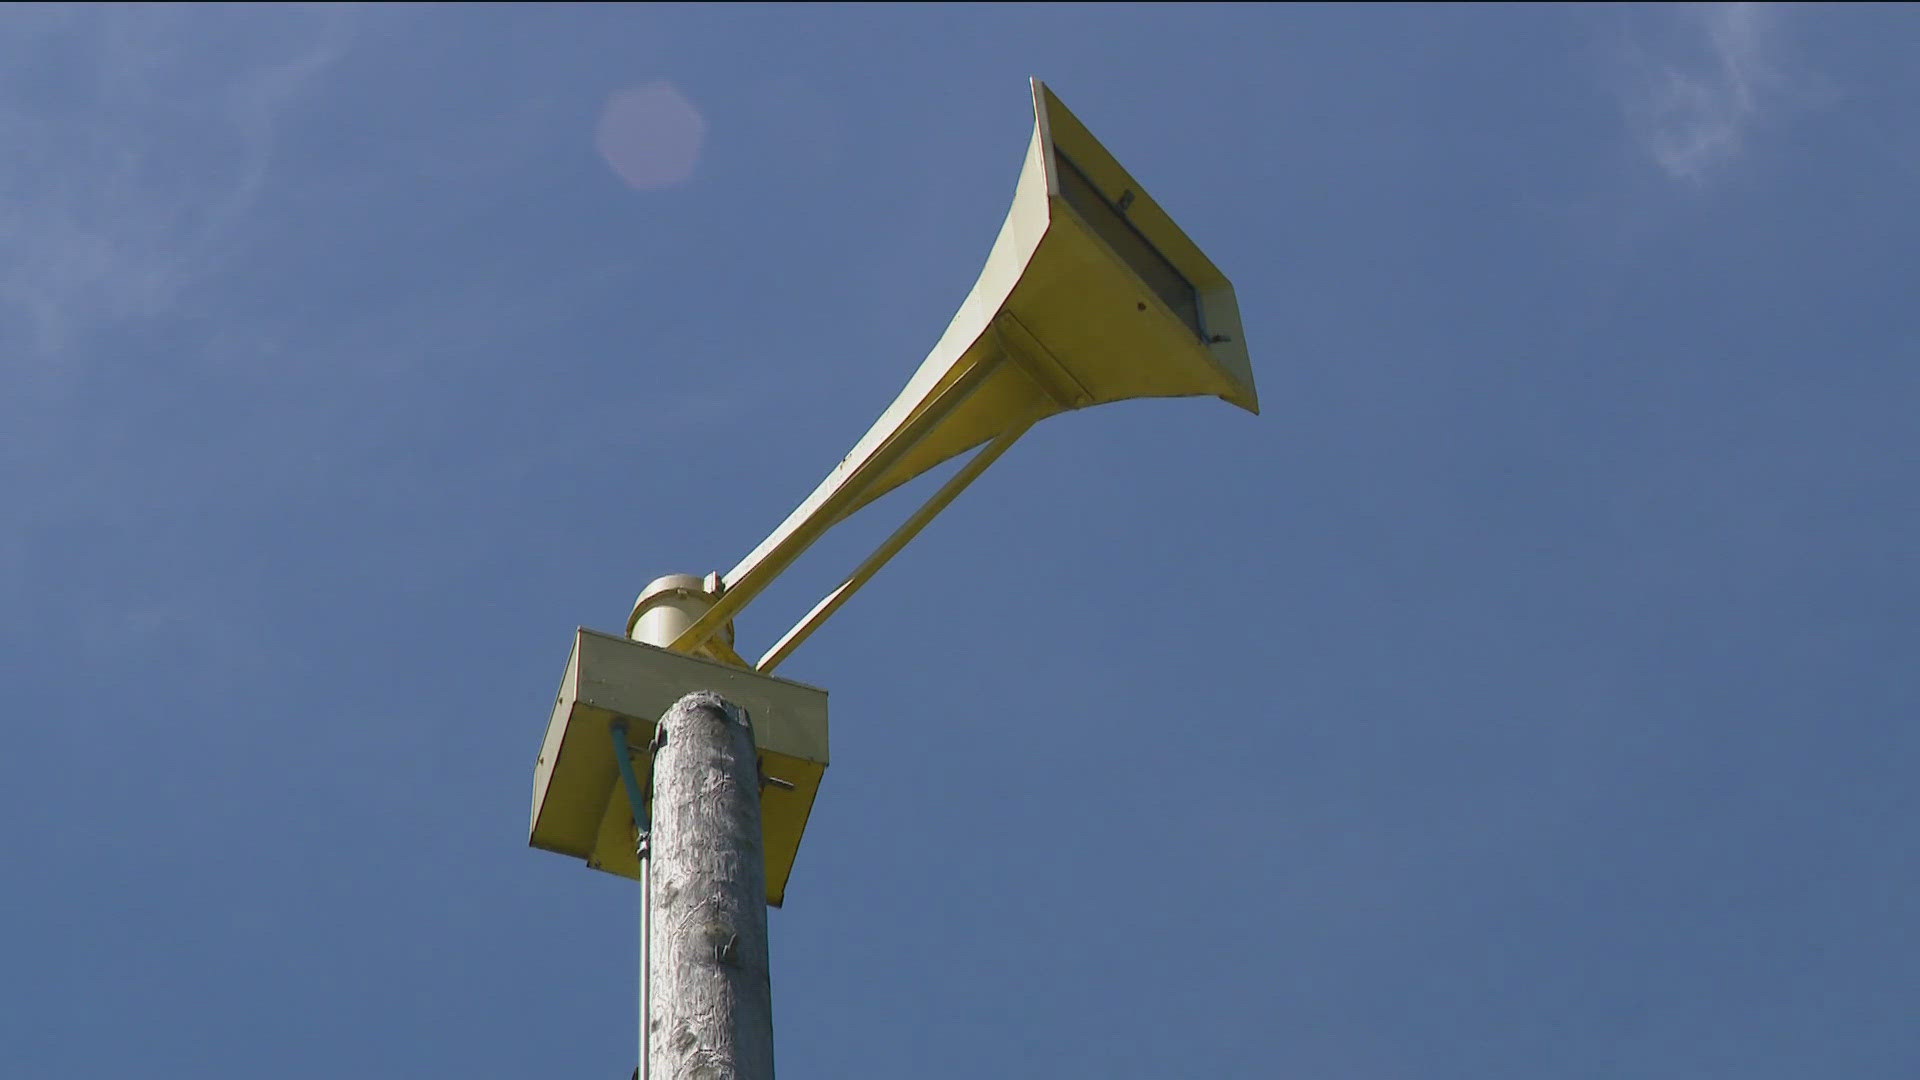 Melissa Andrews joins WTOL 11 News at 4 to preview her Call 11 for Action on outdoor warning siren concerns in a local village.